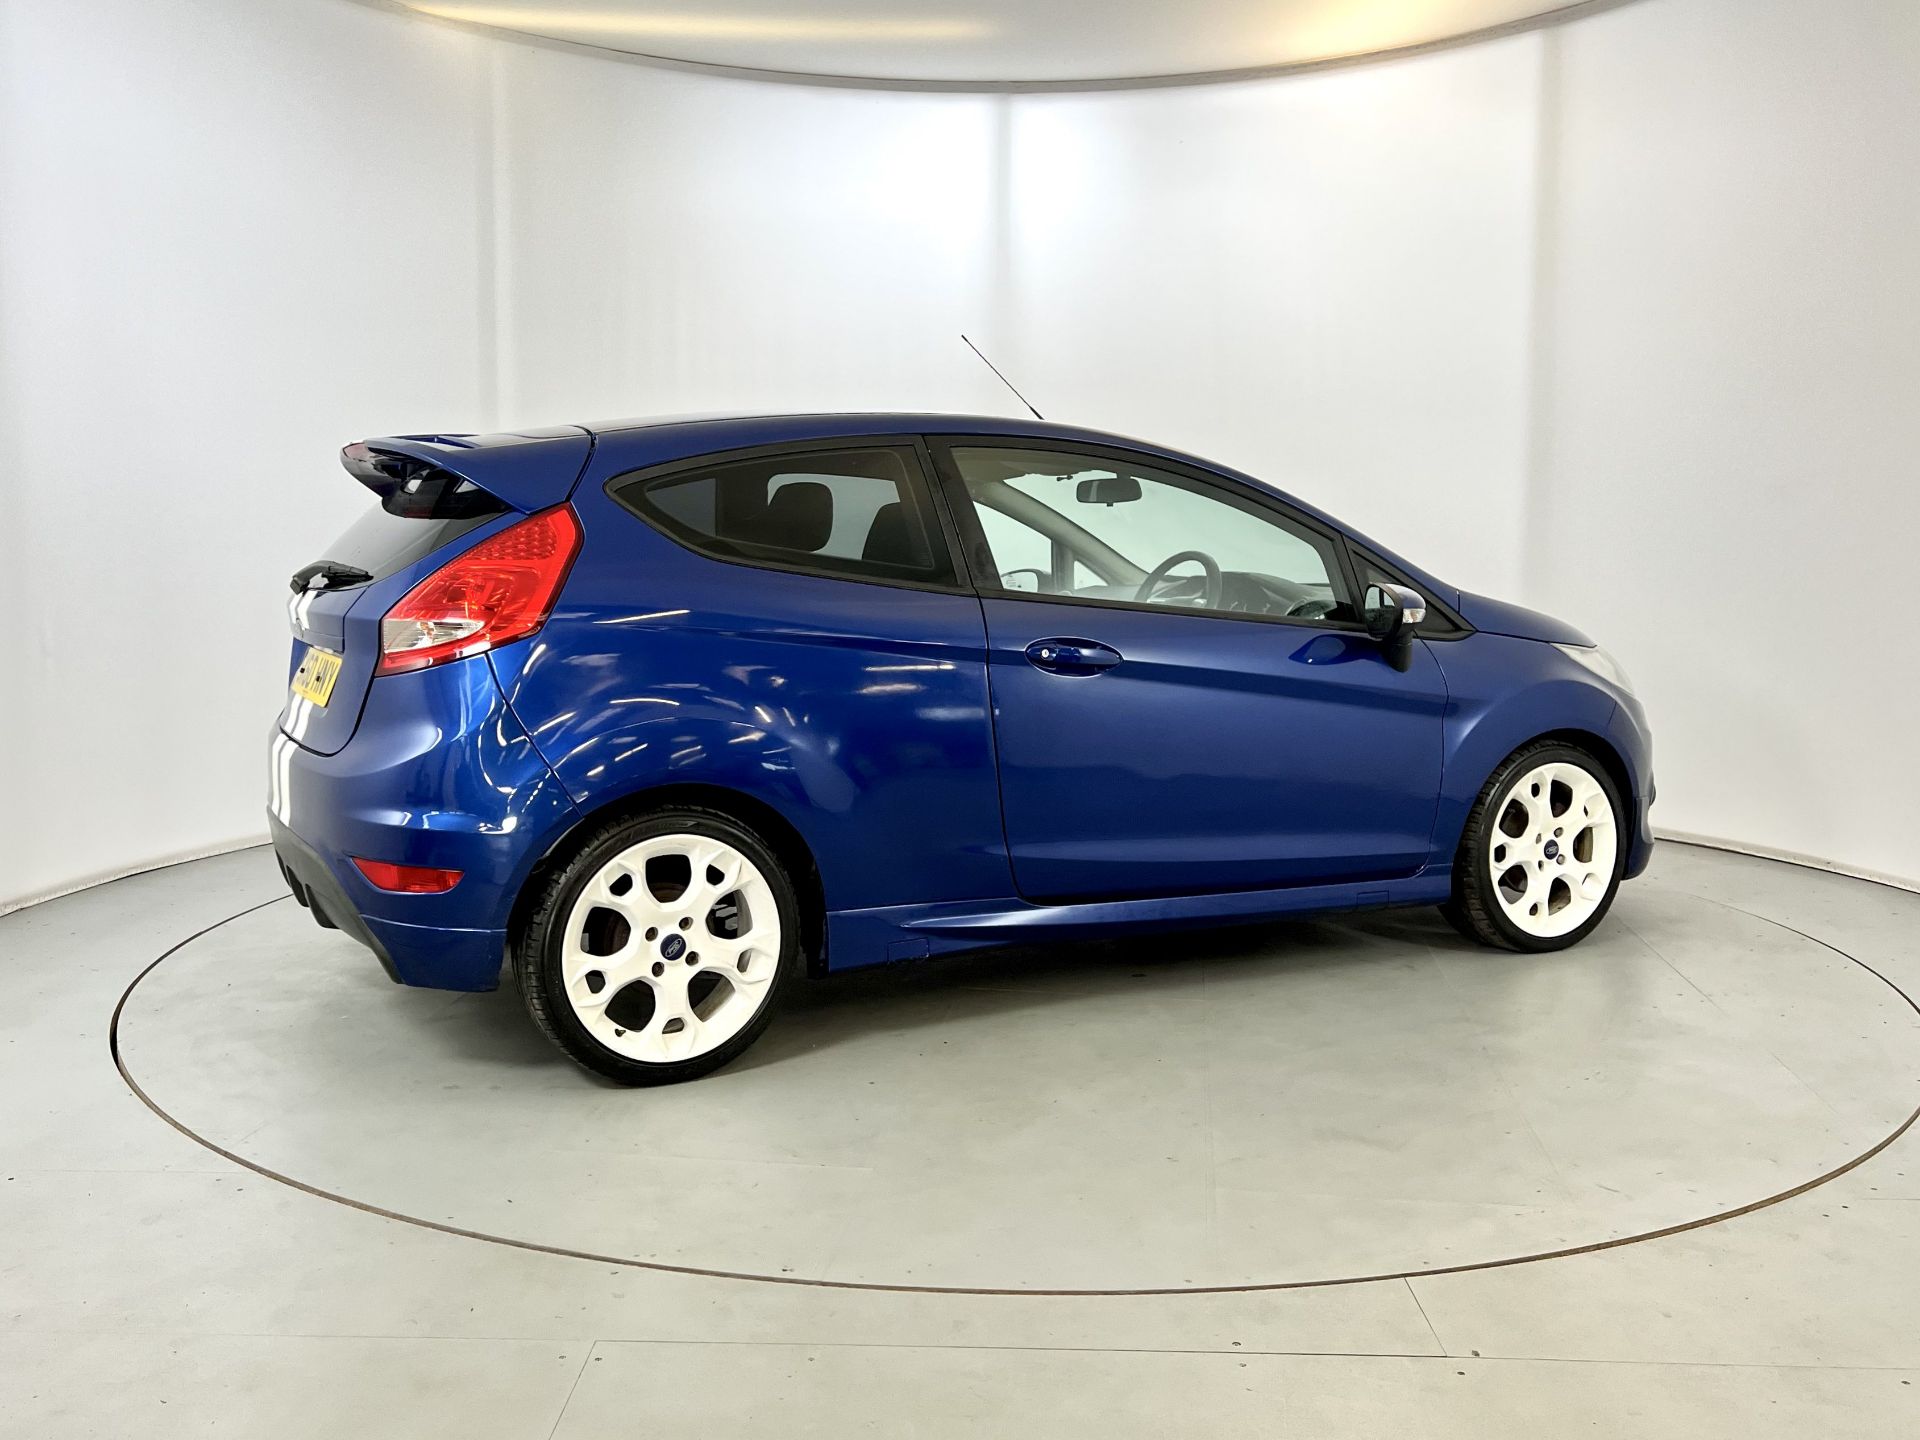 Ford Fiesta S1600 - Image 10 of 30